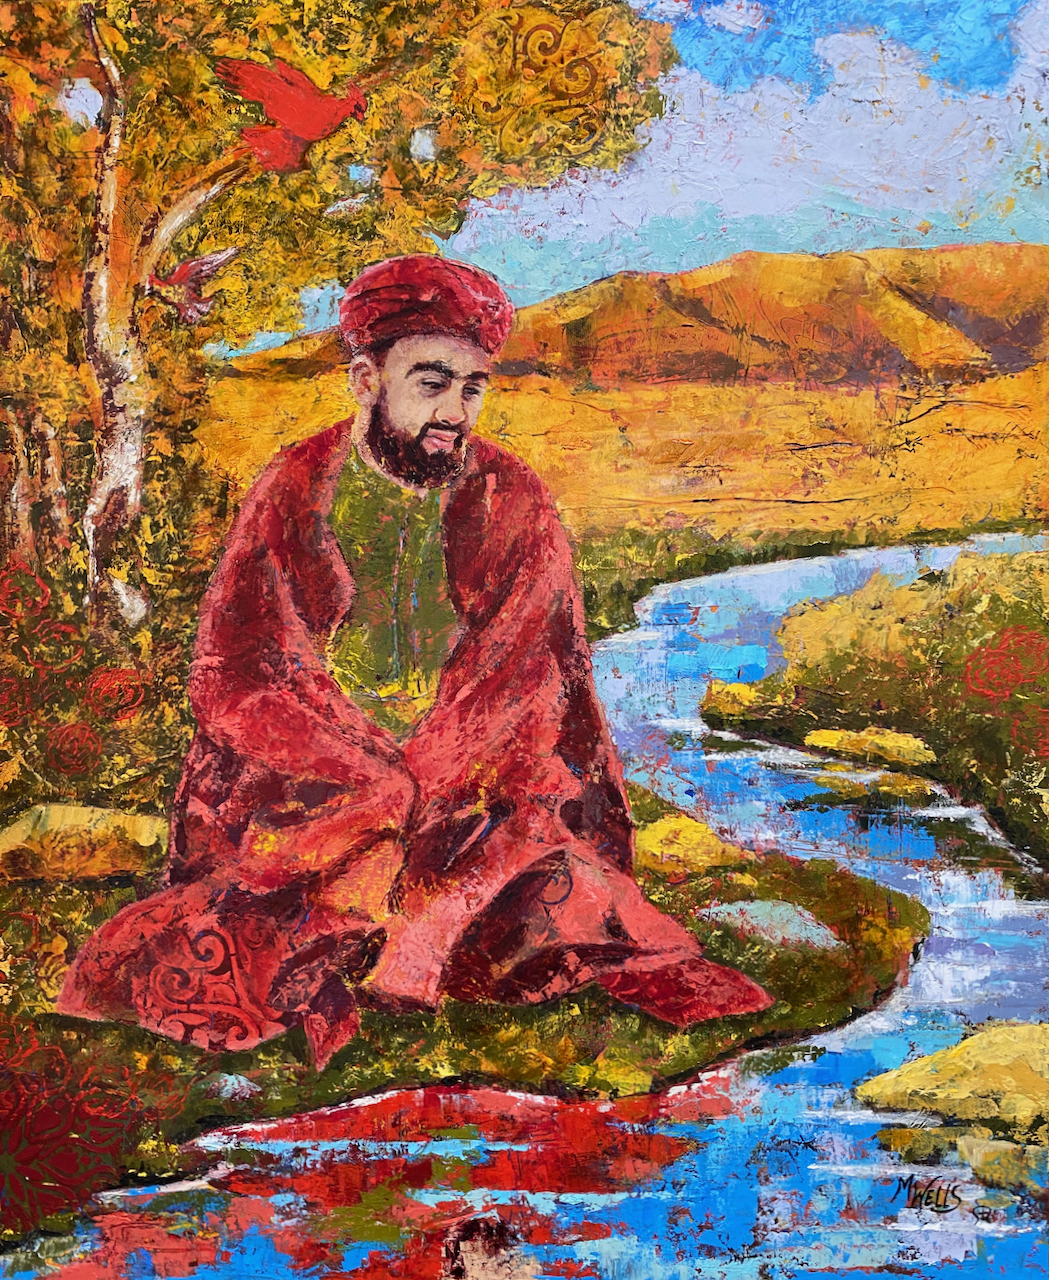 "Murshid and the Water" by Marilyn Wells, oil and cold wax, reds with a blue stream and golden hills